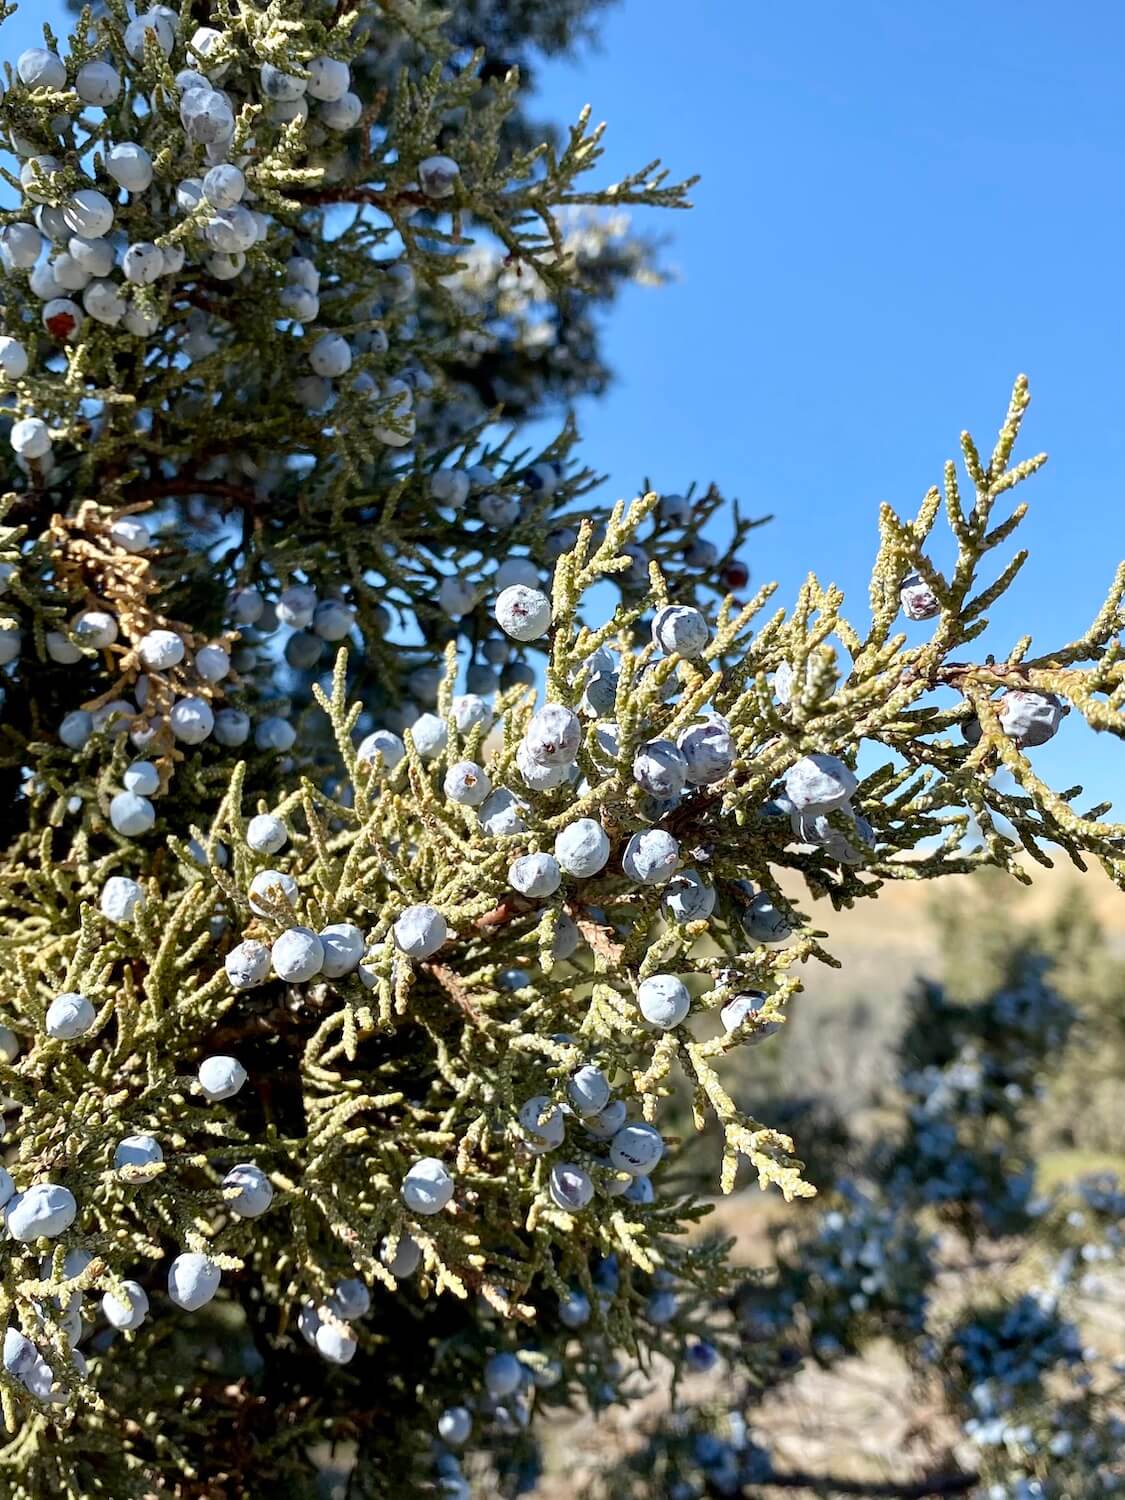 A closeup view of blue juniper berries reveals fruit that's about ripe but still clinging to the delicate needles.  